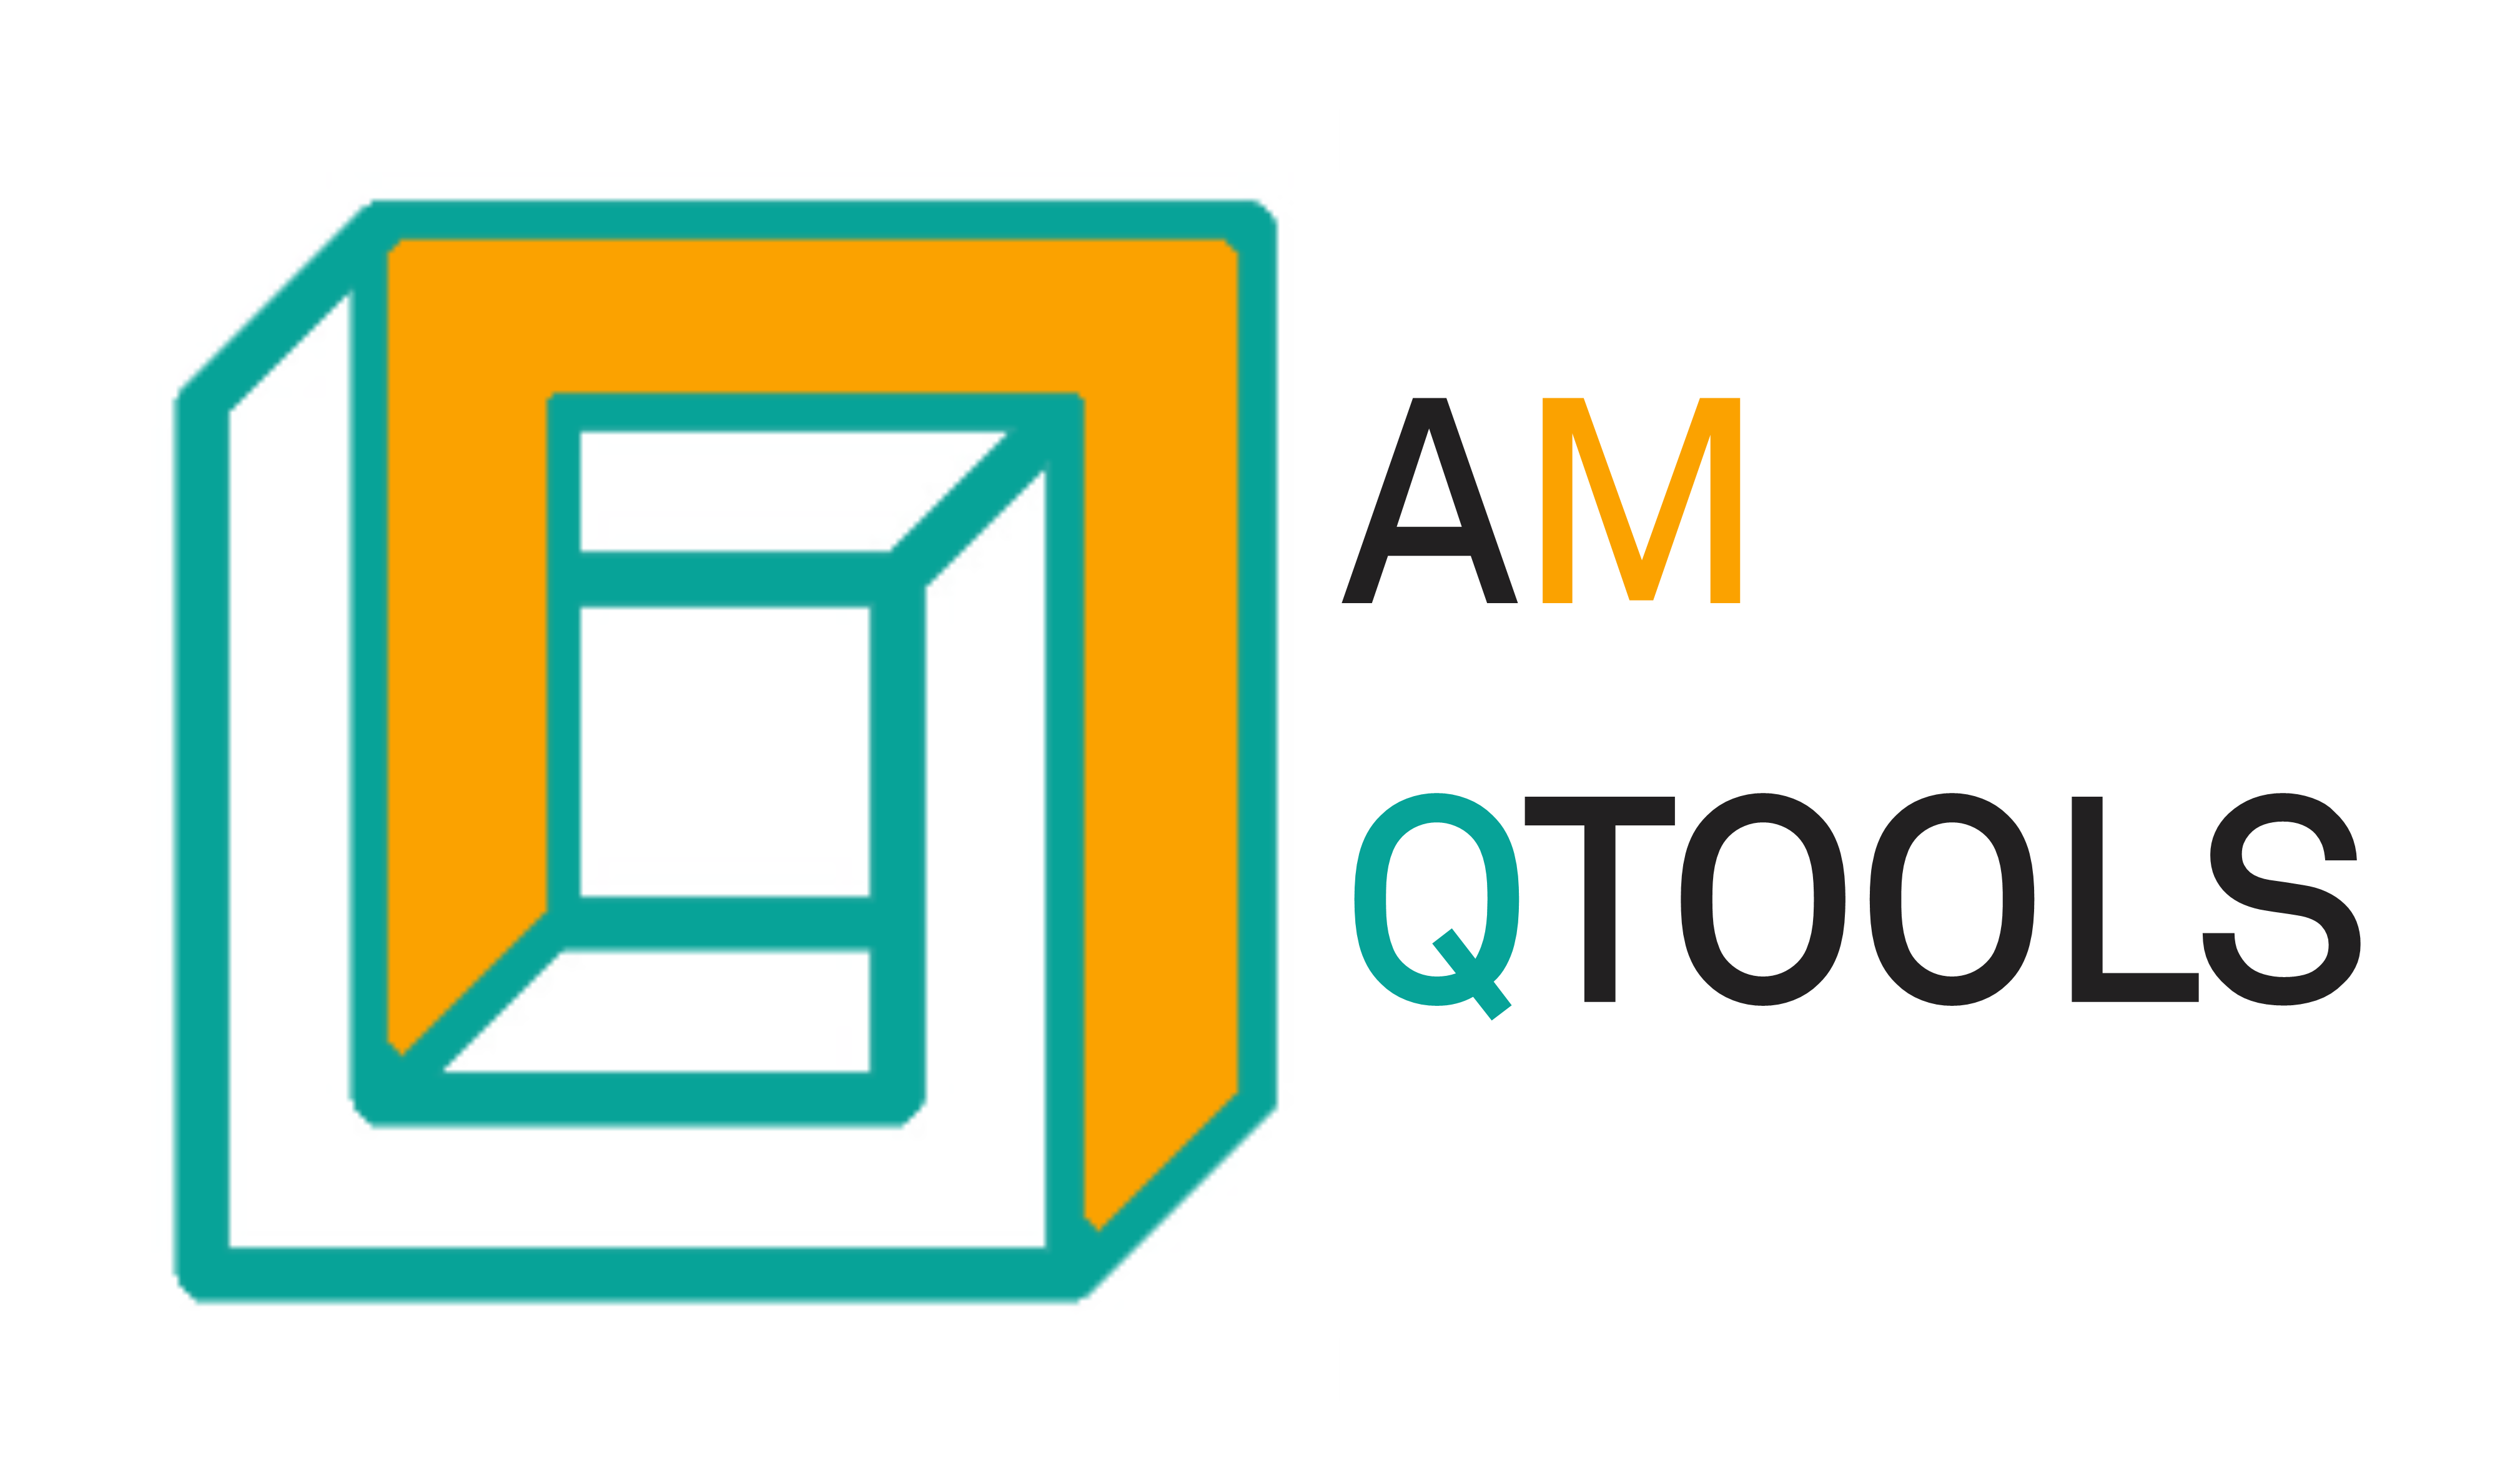 AM QTOOLS: Additive Manufacturing Quality and Monitoring Control System